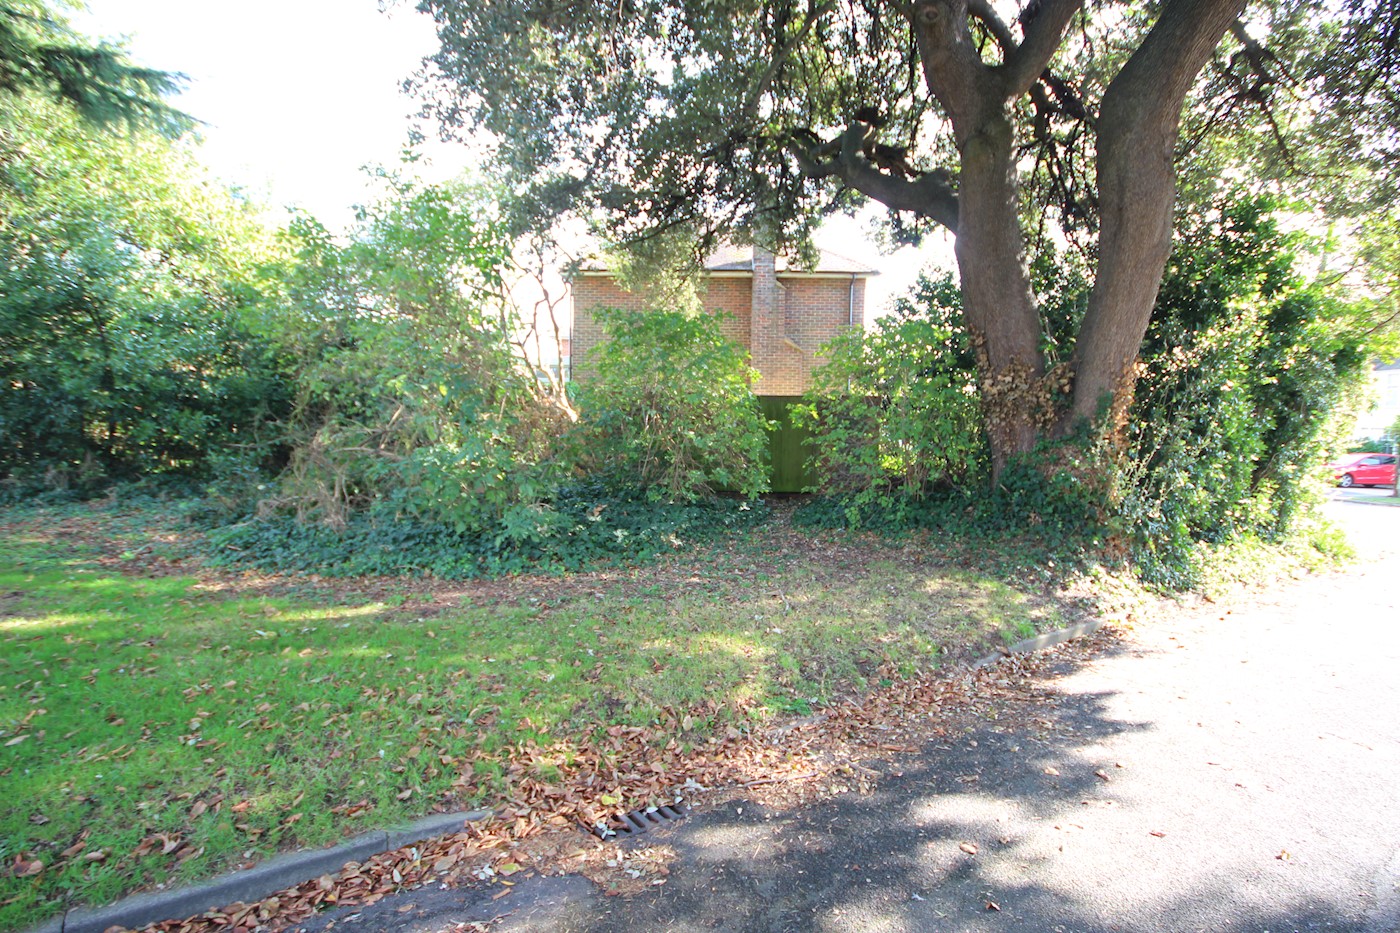 Land on the north side of The Driveway, Shoreham by Sea, BN43 5GG 1/5